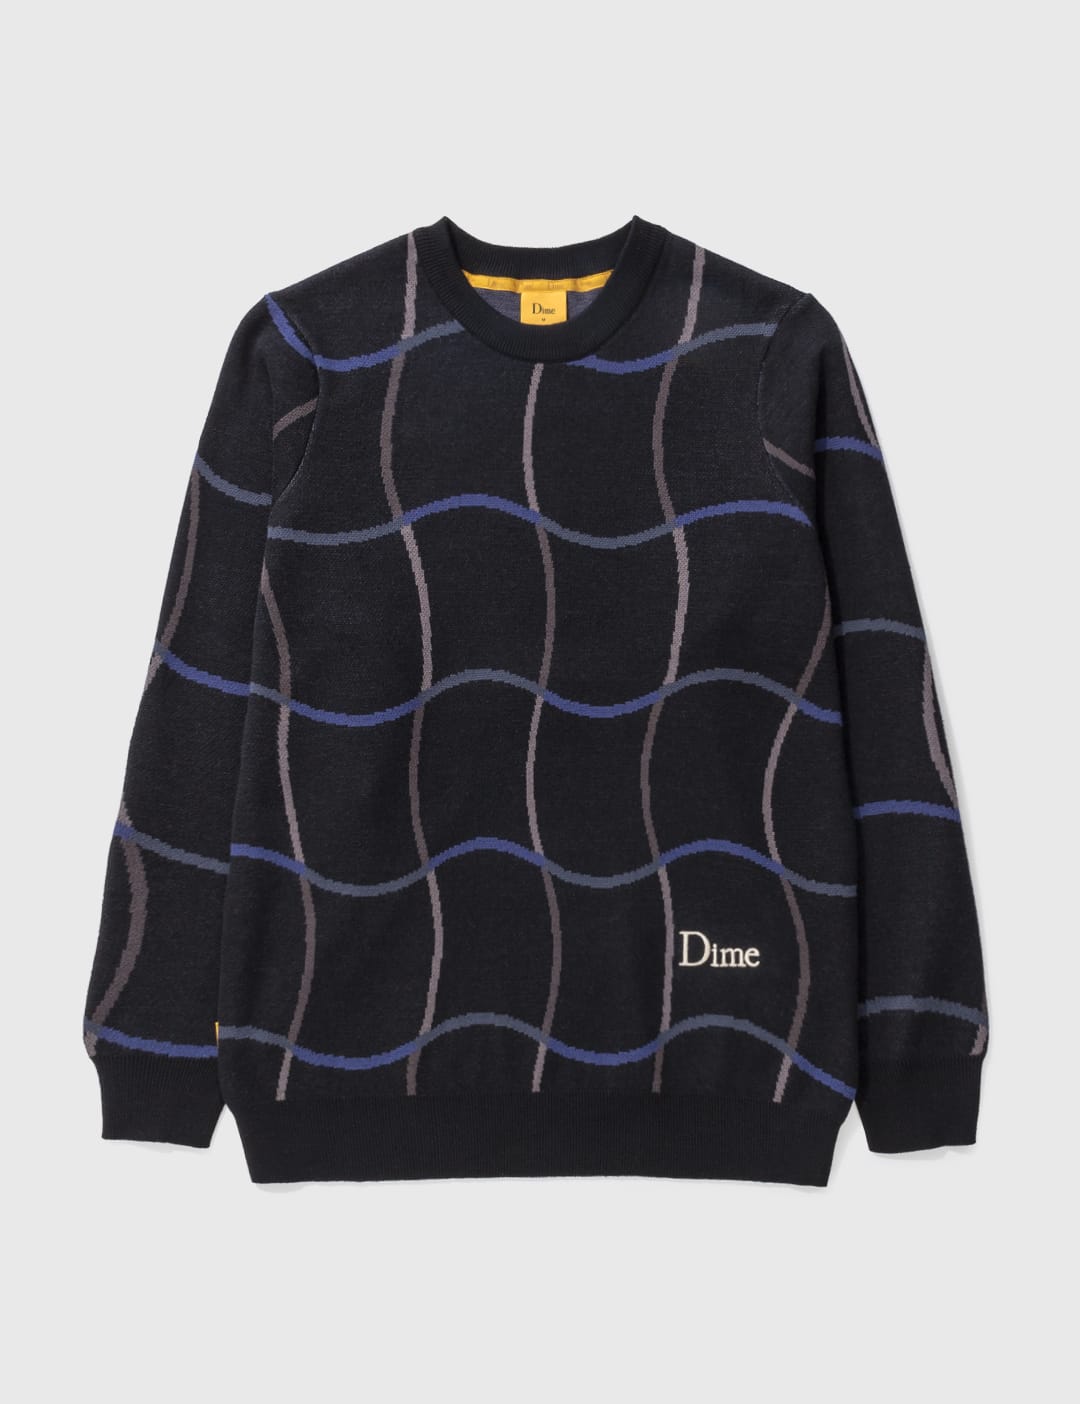 Dime - Wave Knit Sweater | HBX - Globally Curated Fashion and 